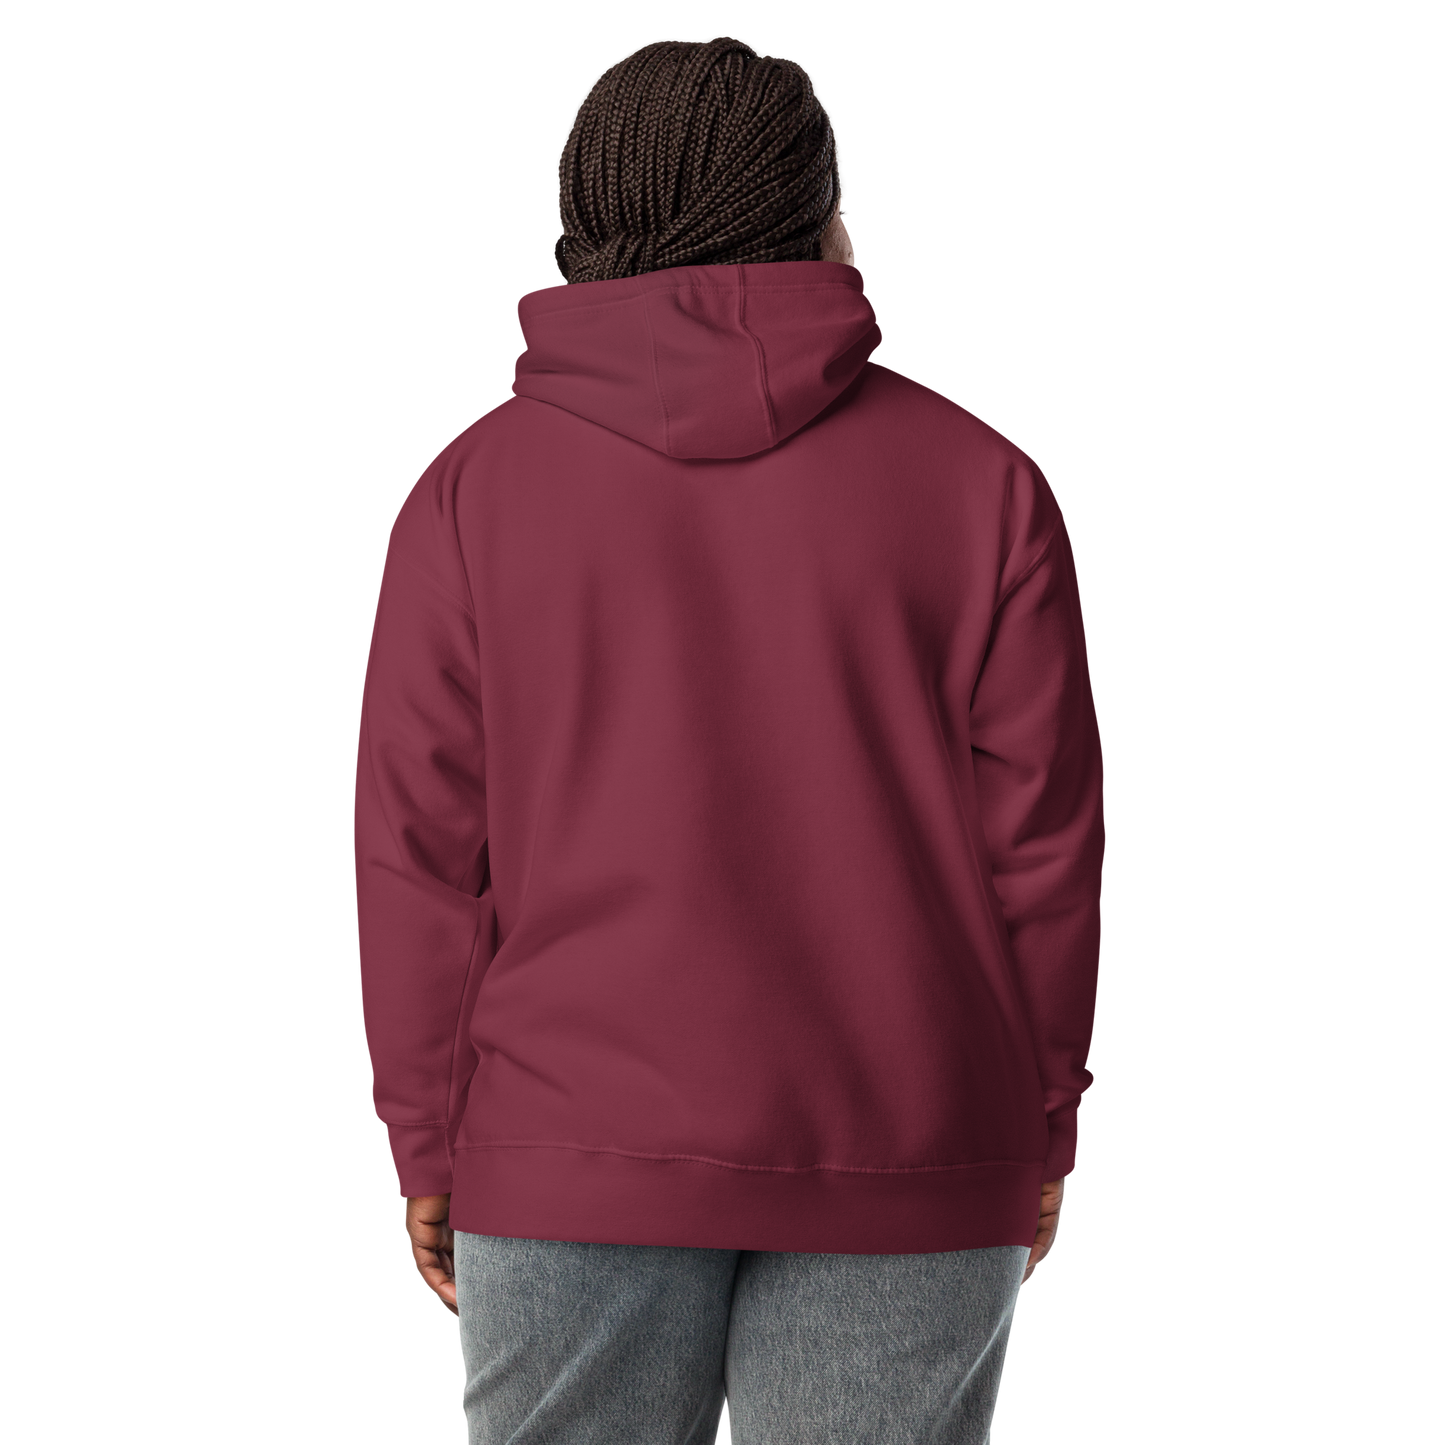 Wistram Hoodie (Fitted Style)